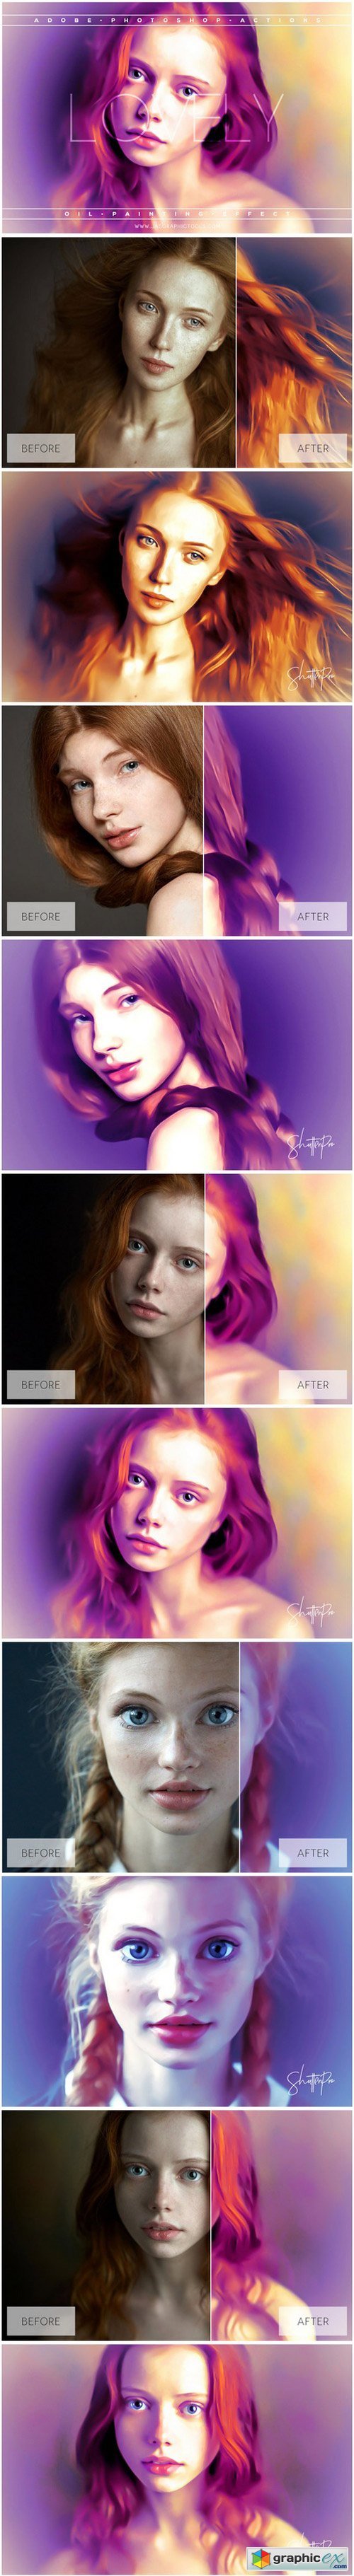 Lovely Oil Painting Effect Actions